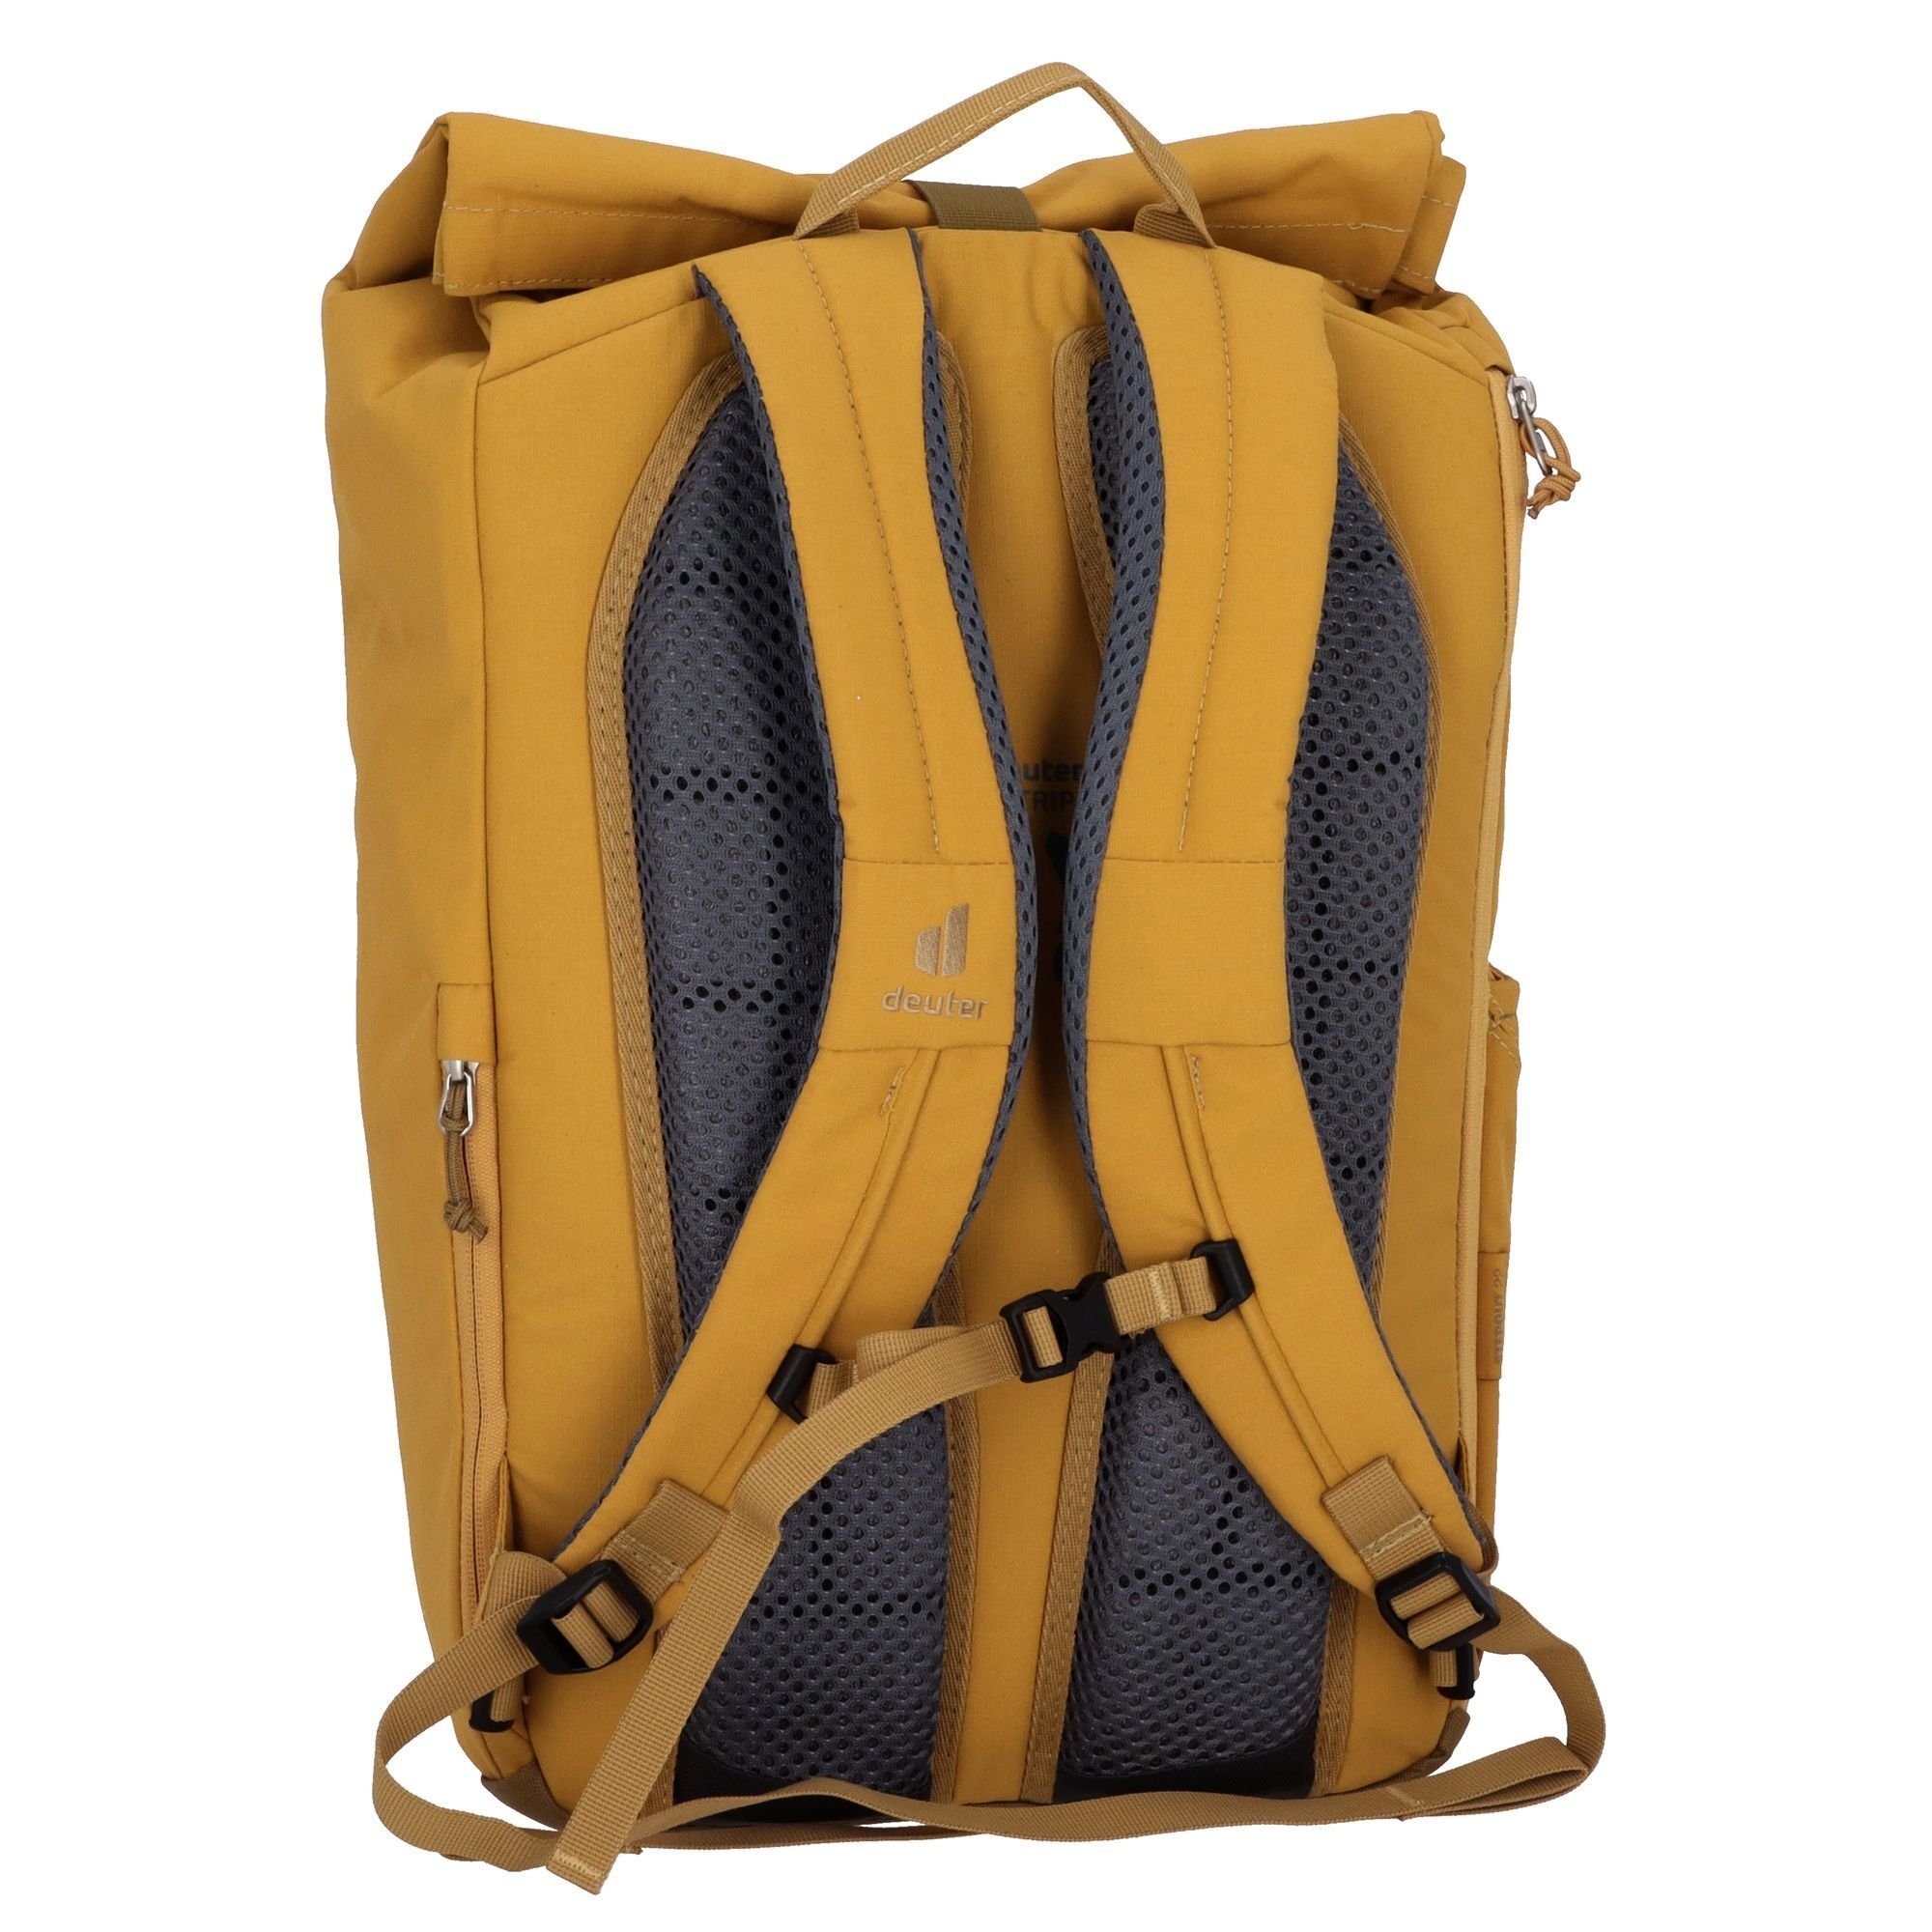 caramel-clay Daypack deuter Polyester Stepout,